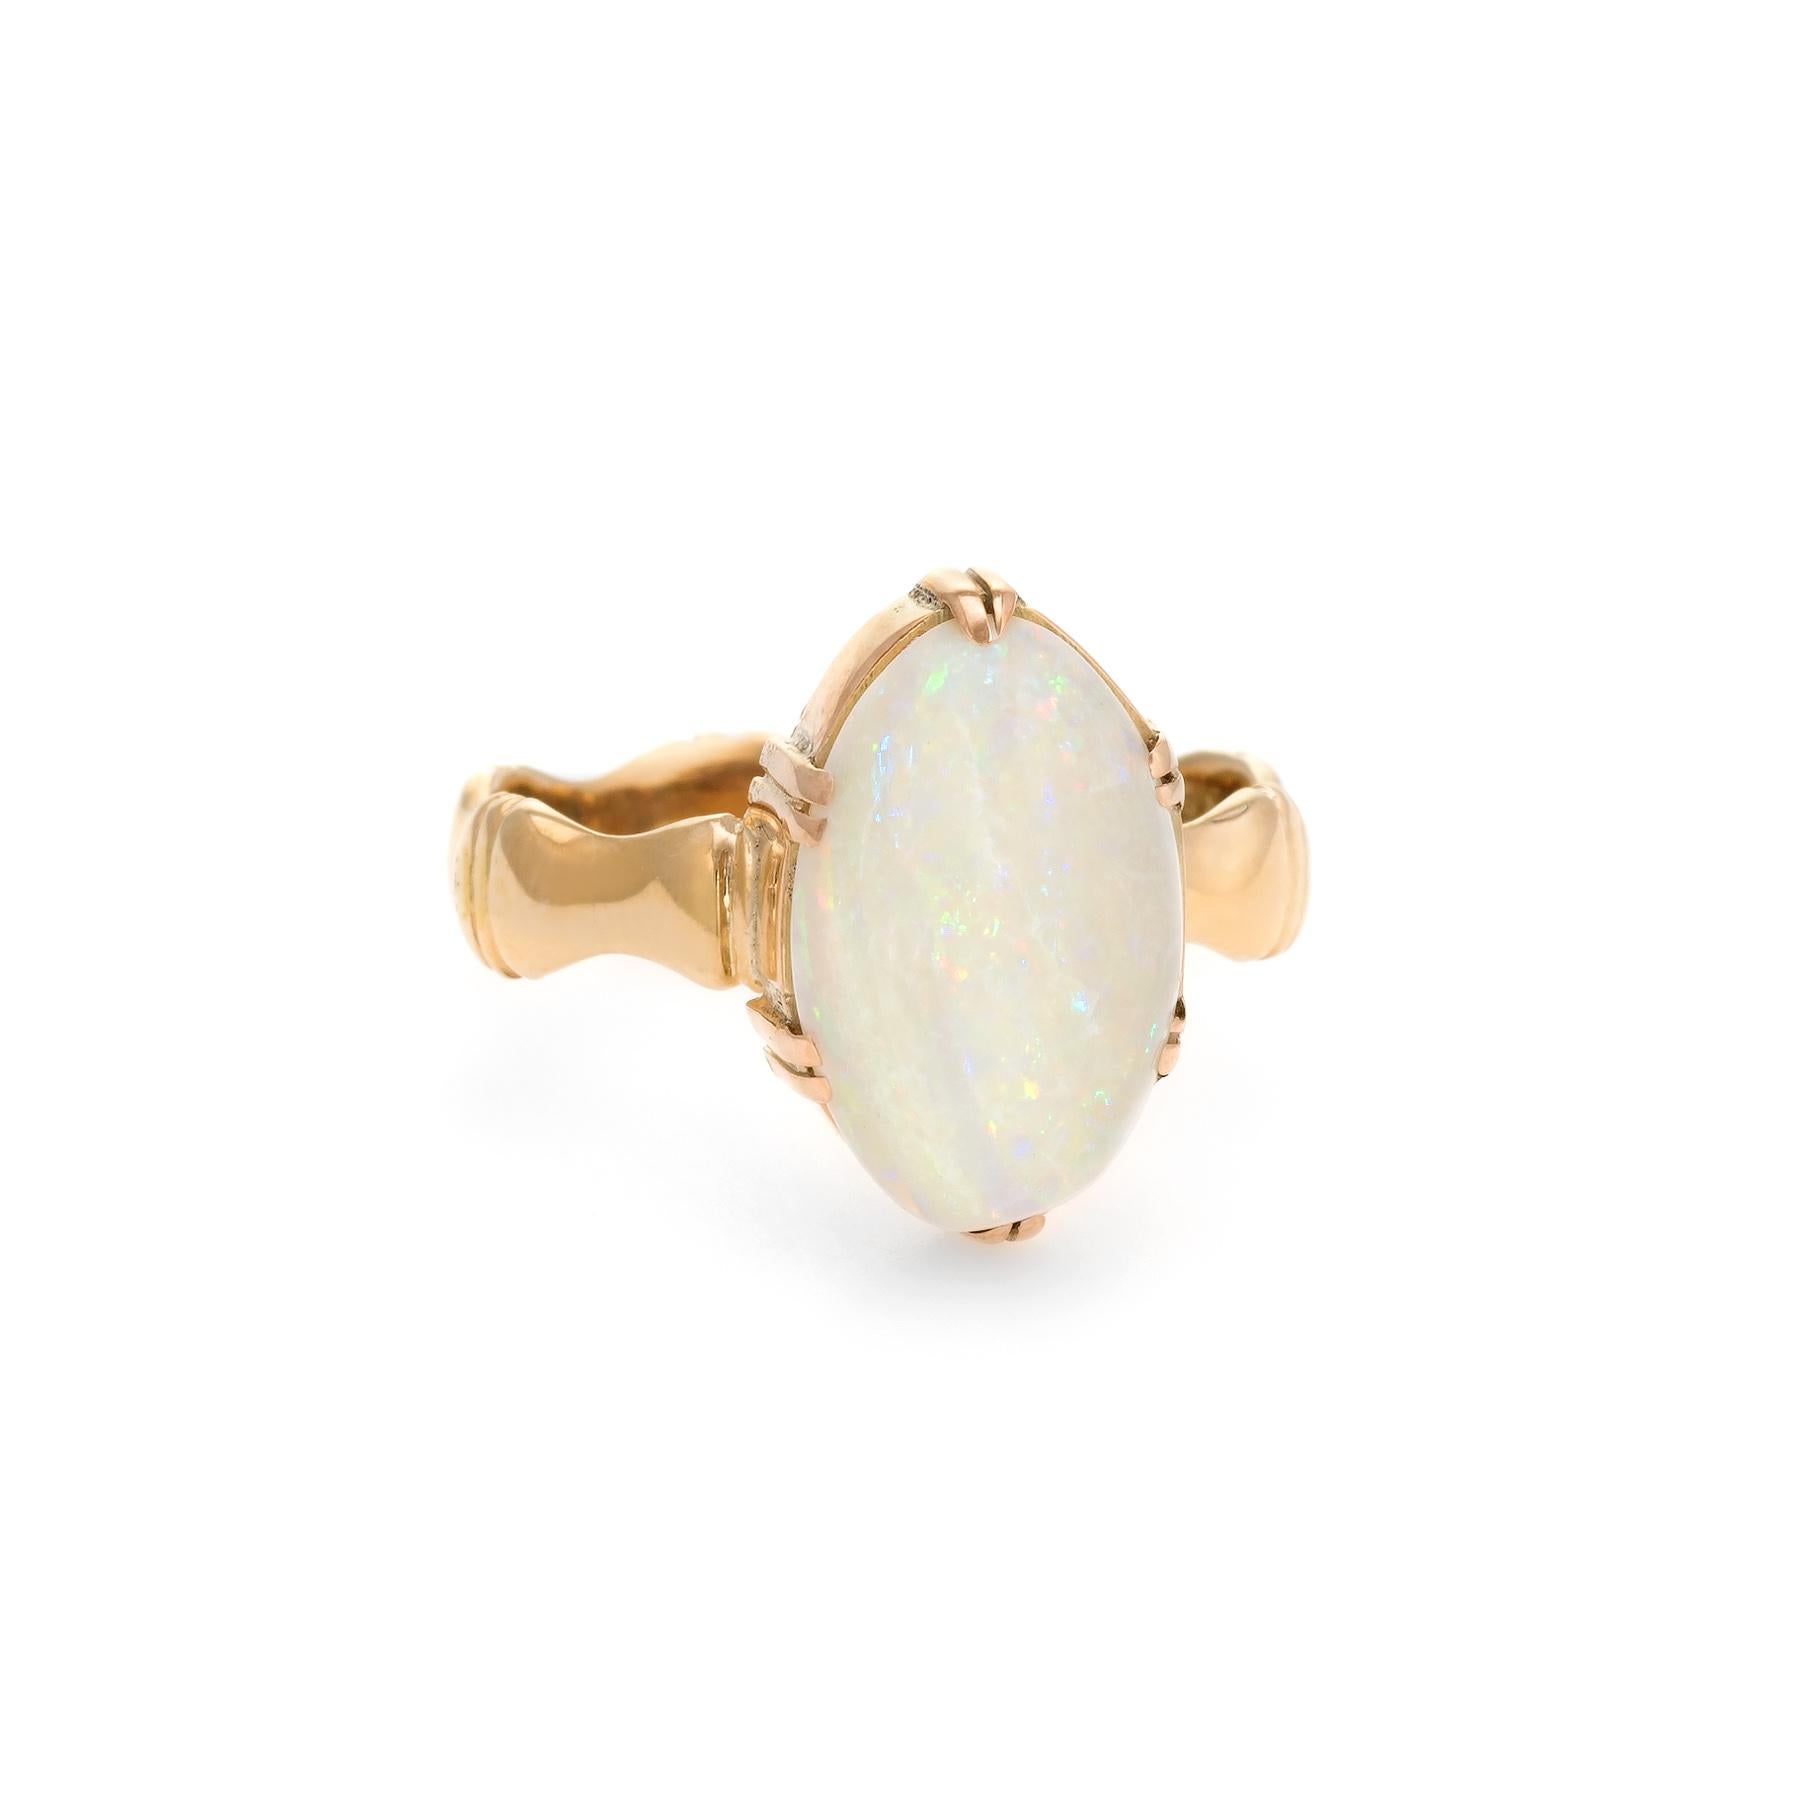 Finely detailed vintage opal cocktail ring (circa 1960s to 1970s), crafted in 14 karat yellow gold. 

Cabochon cut natural oval opal measures 15mm x 10mm (estimated at 7 carats). The opal is in excellent condition and free of cracks or chips. The